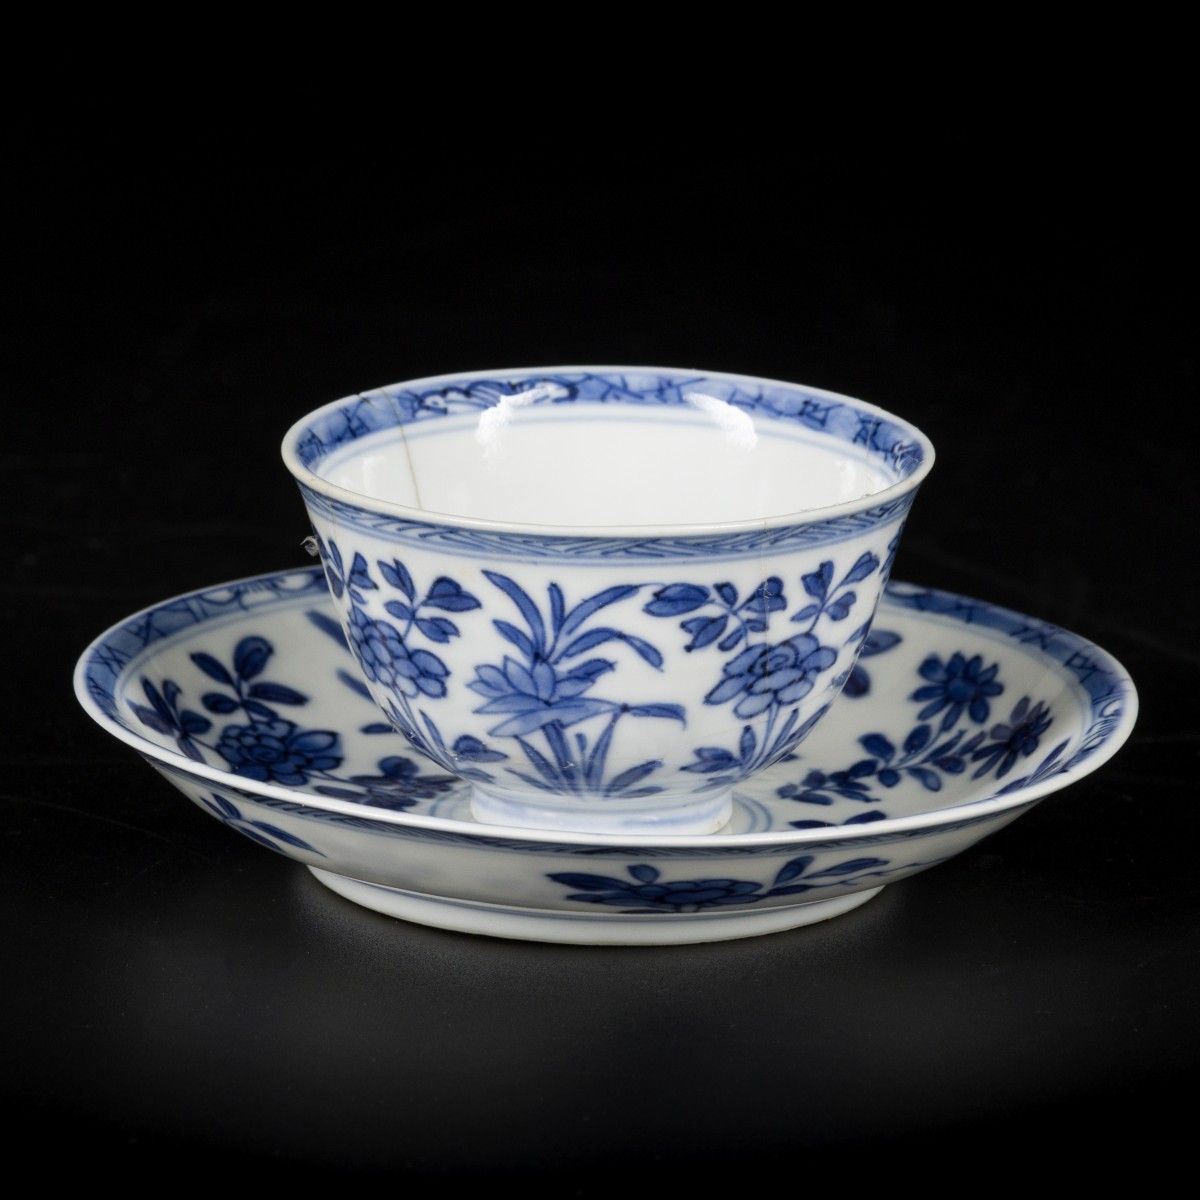 A porcelain cup and saucer with floral decorations and 6-character mark, China, &hellip;